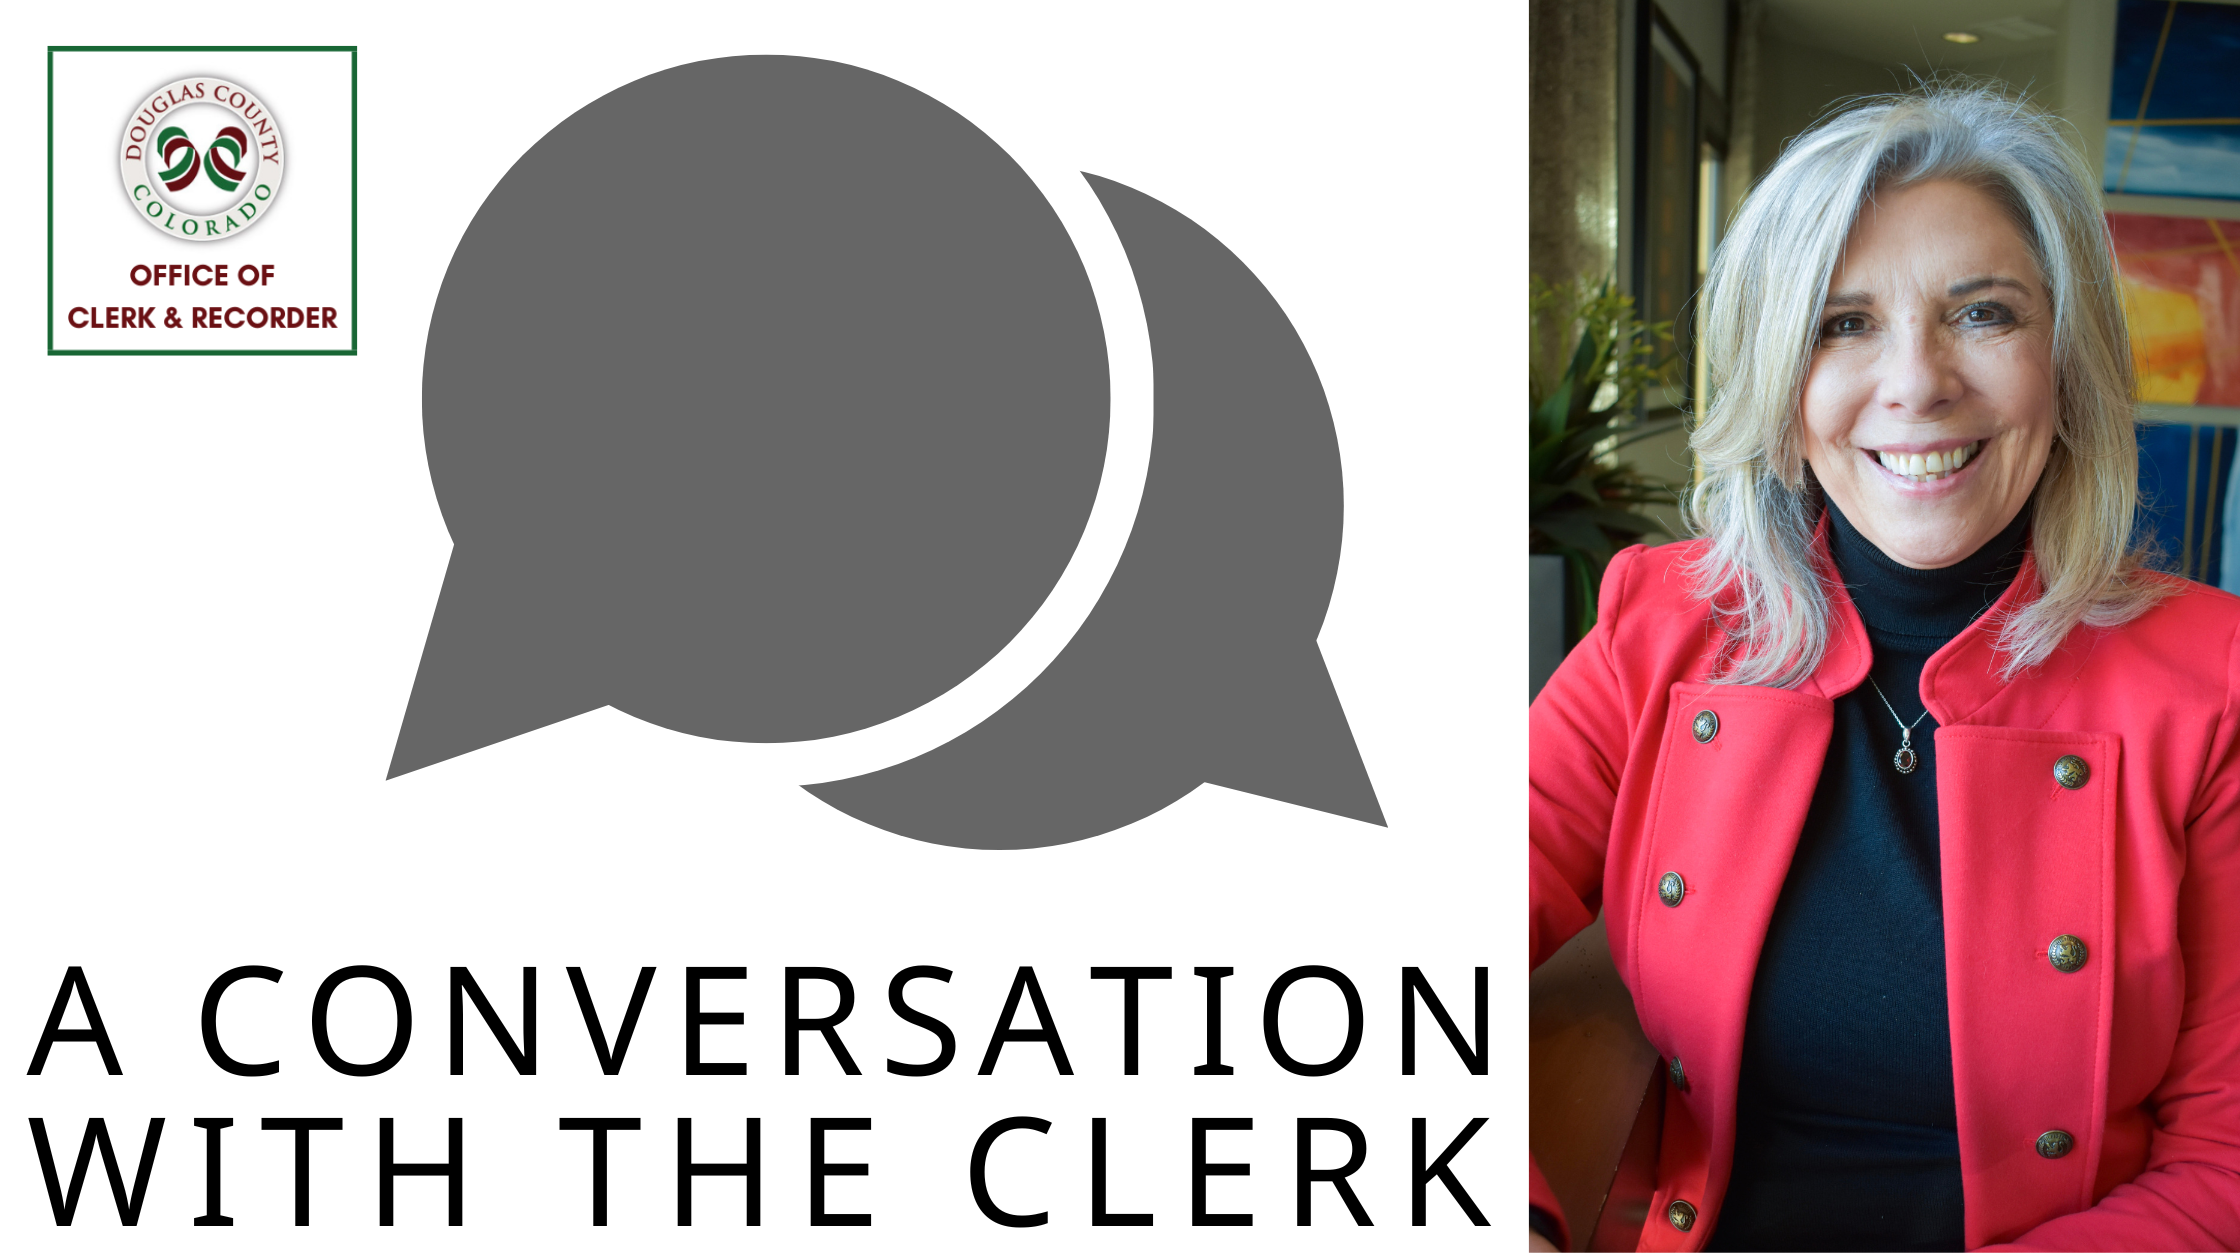 A Conversation with the Clerk, Sheri in Red jacket